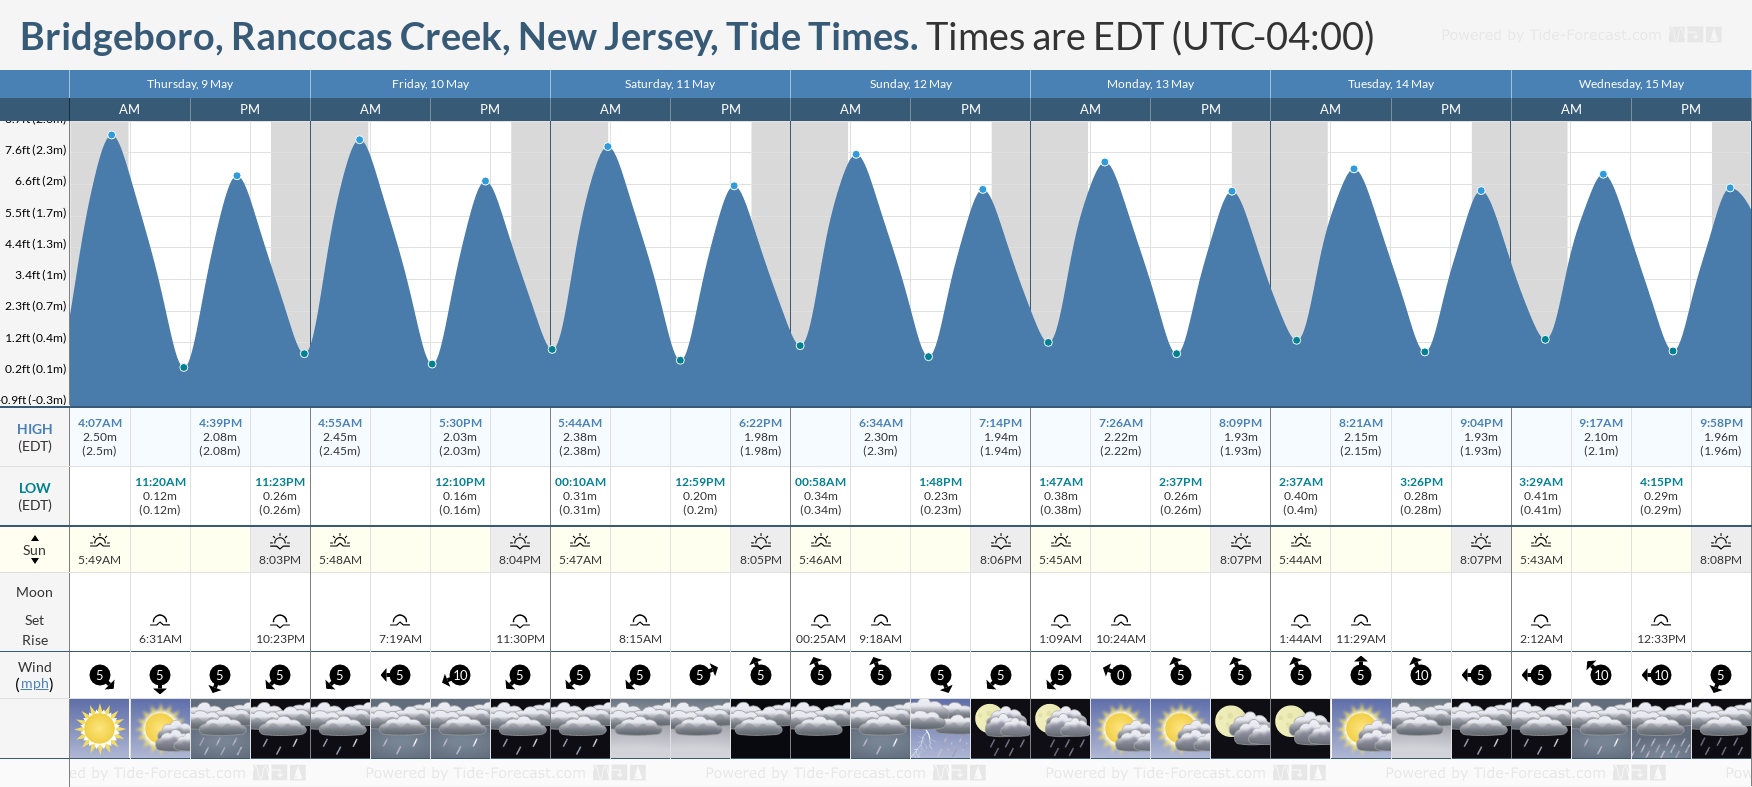 Bridgeboro, Rancocas Creek, New Jersey Tide Chart including high and low tide tide times for the next 7 days